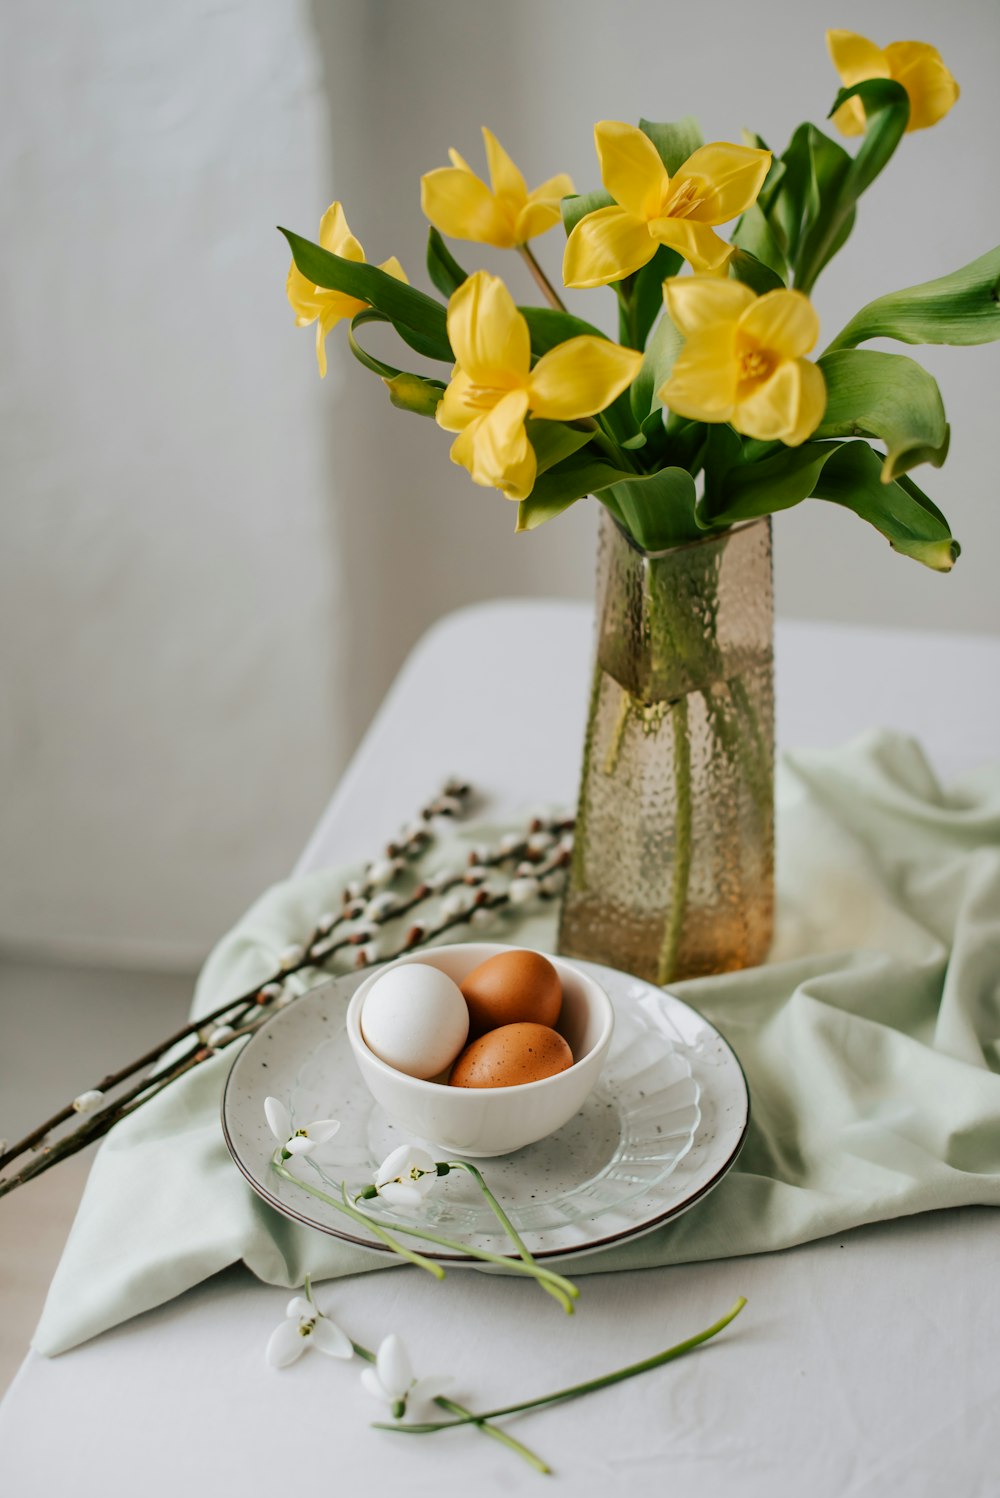 a glass vase filled with yellow flowers next to a bowl of eggs